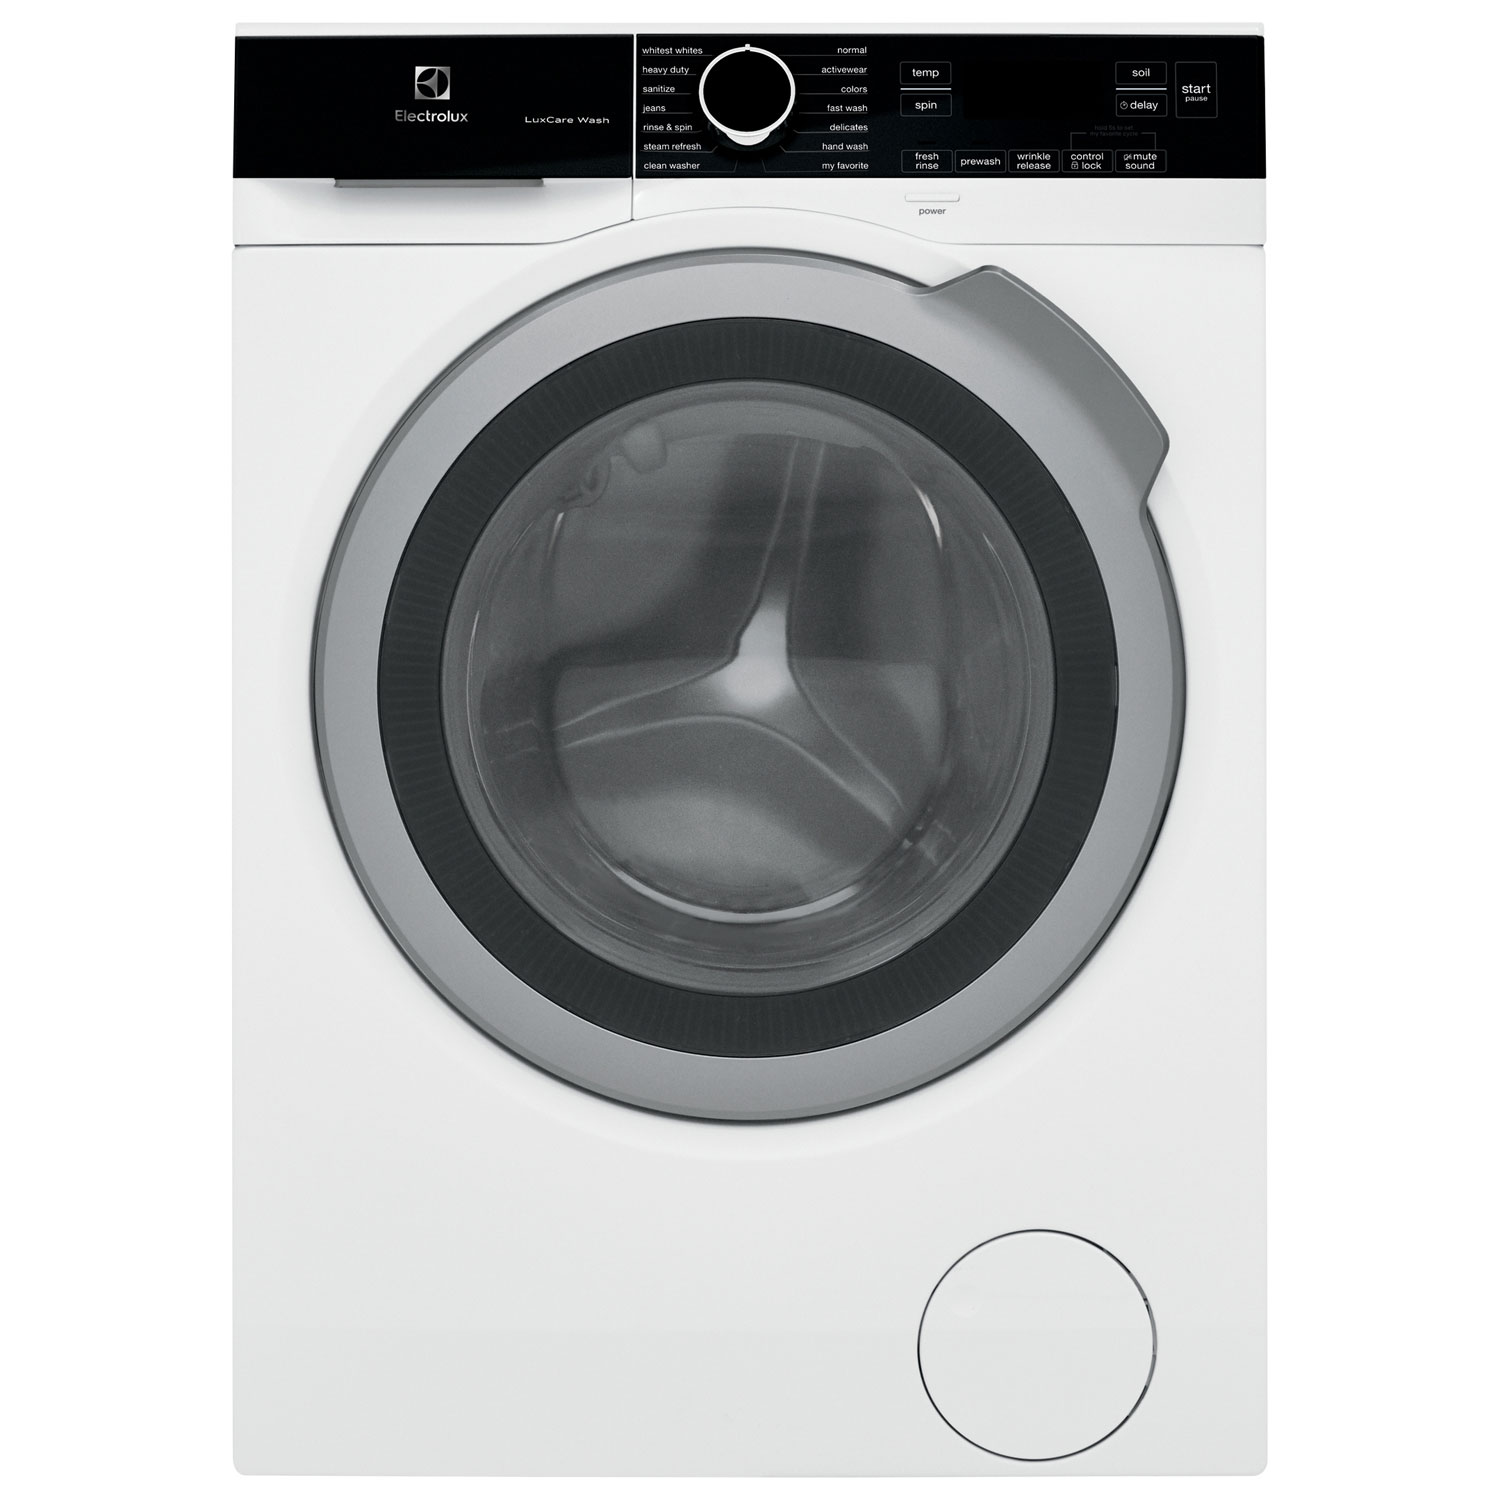 Electrolux 2.4 Cu. Ft. Front Load Steam Washer (ELFW4222AW) - White